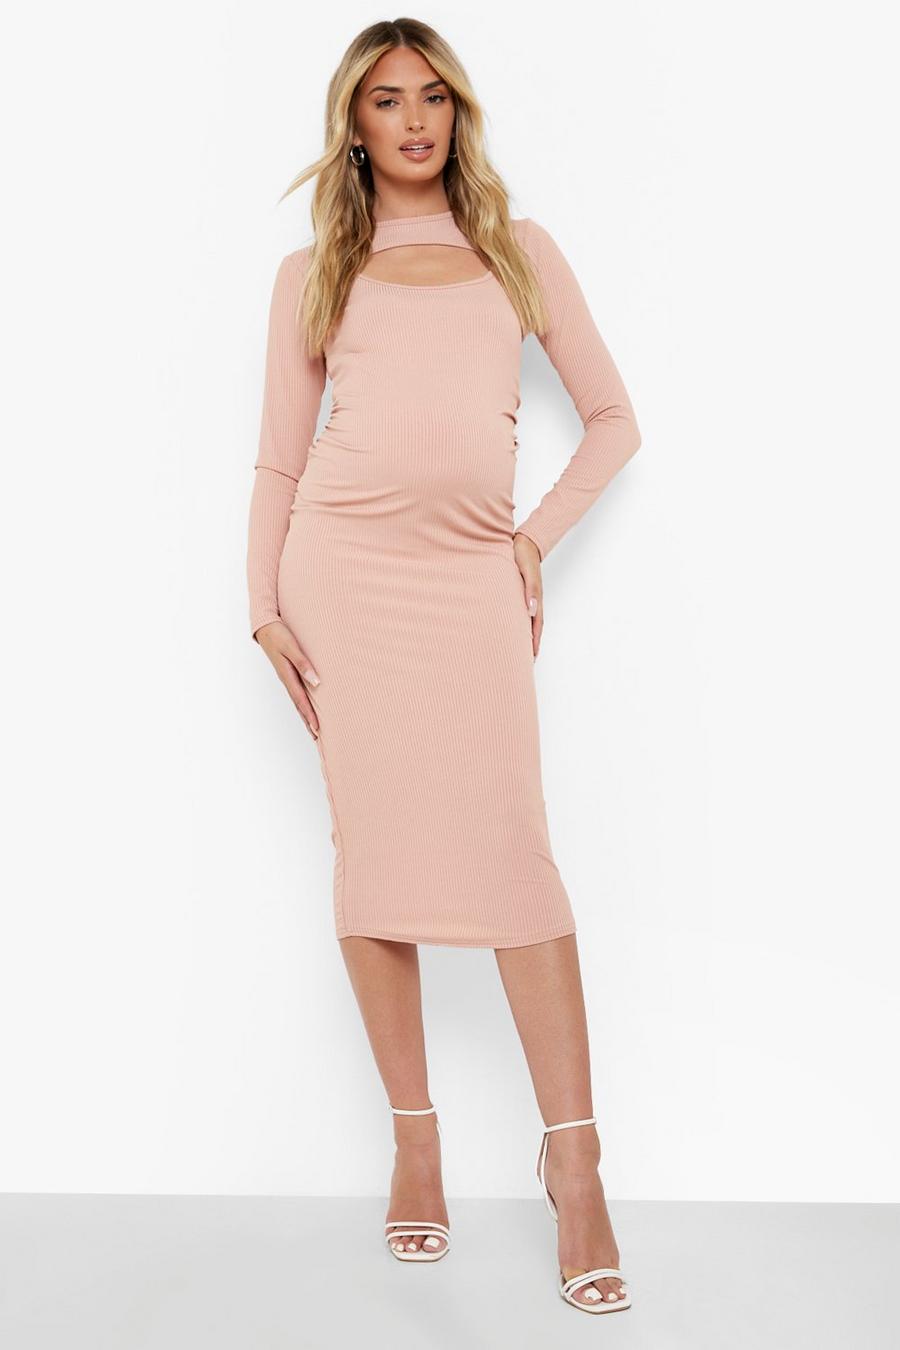 Clay Maternity Rib Cut Out Midi Dress image number 1